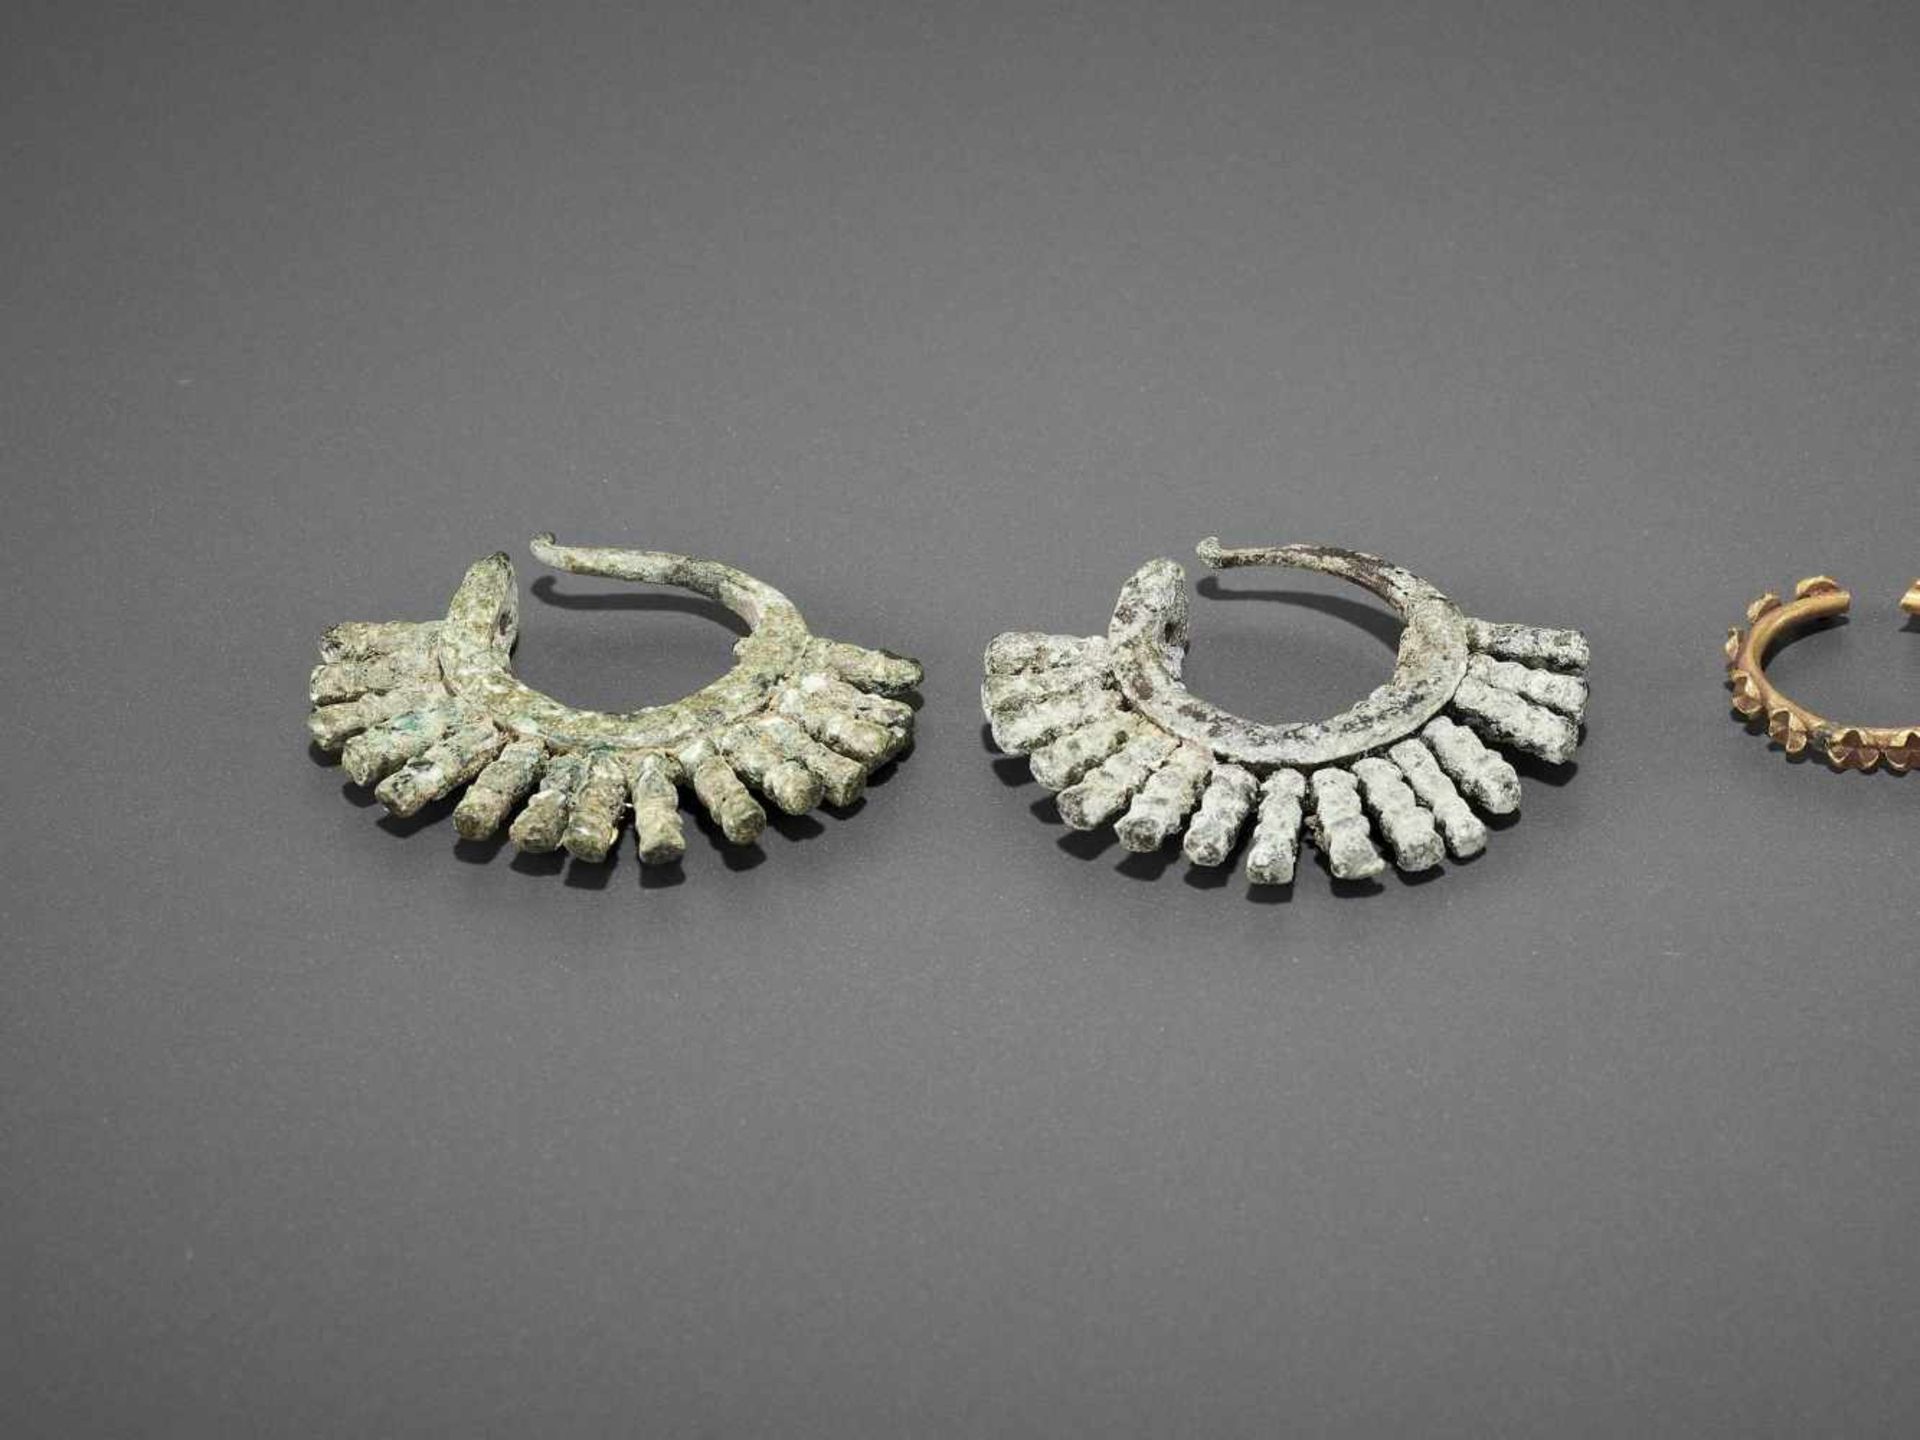 FIVE BACTRIAN GOLD AND BRONZE EARRINGS - Image 5 of 6